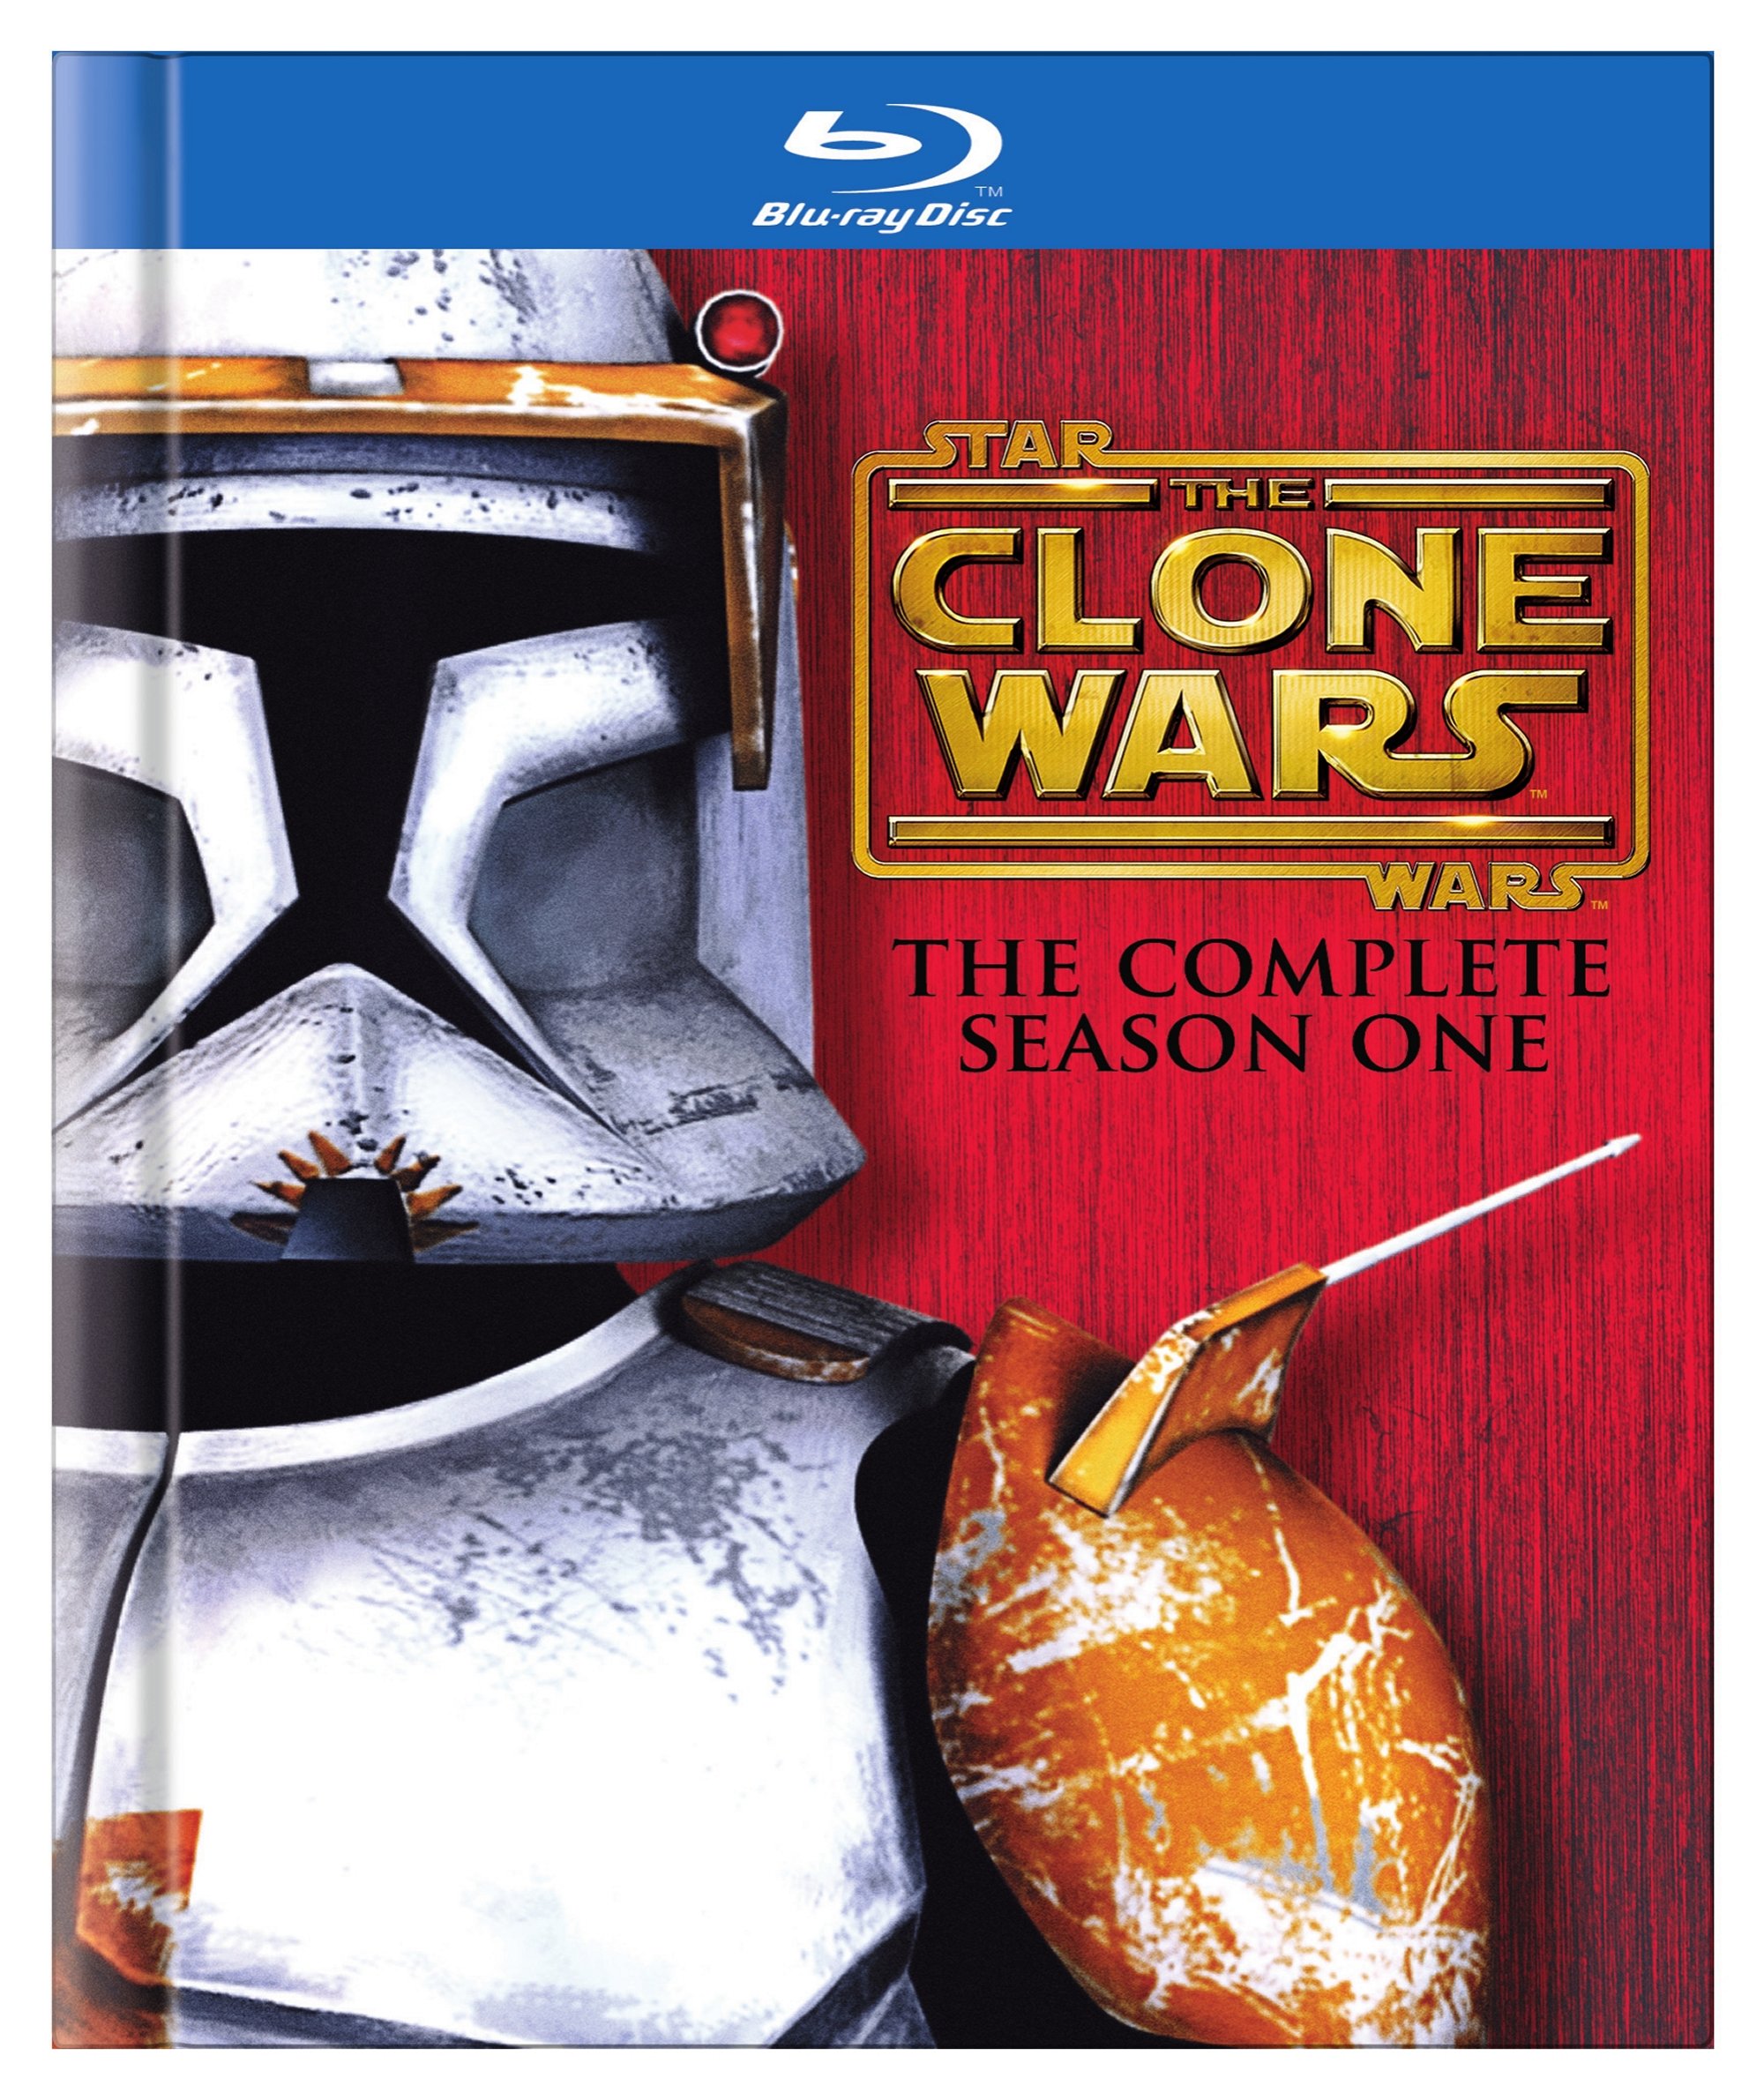 Star Wars: The Clone Wars: The Complete Season One (Blu-ray) - image 1 of 2